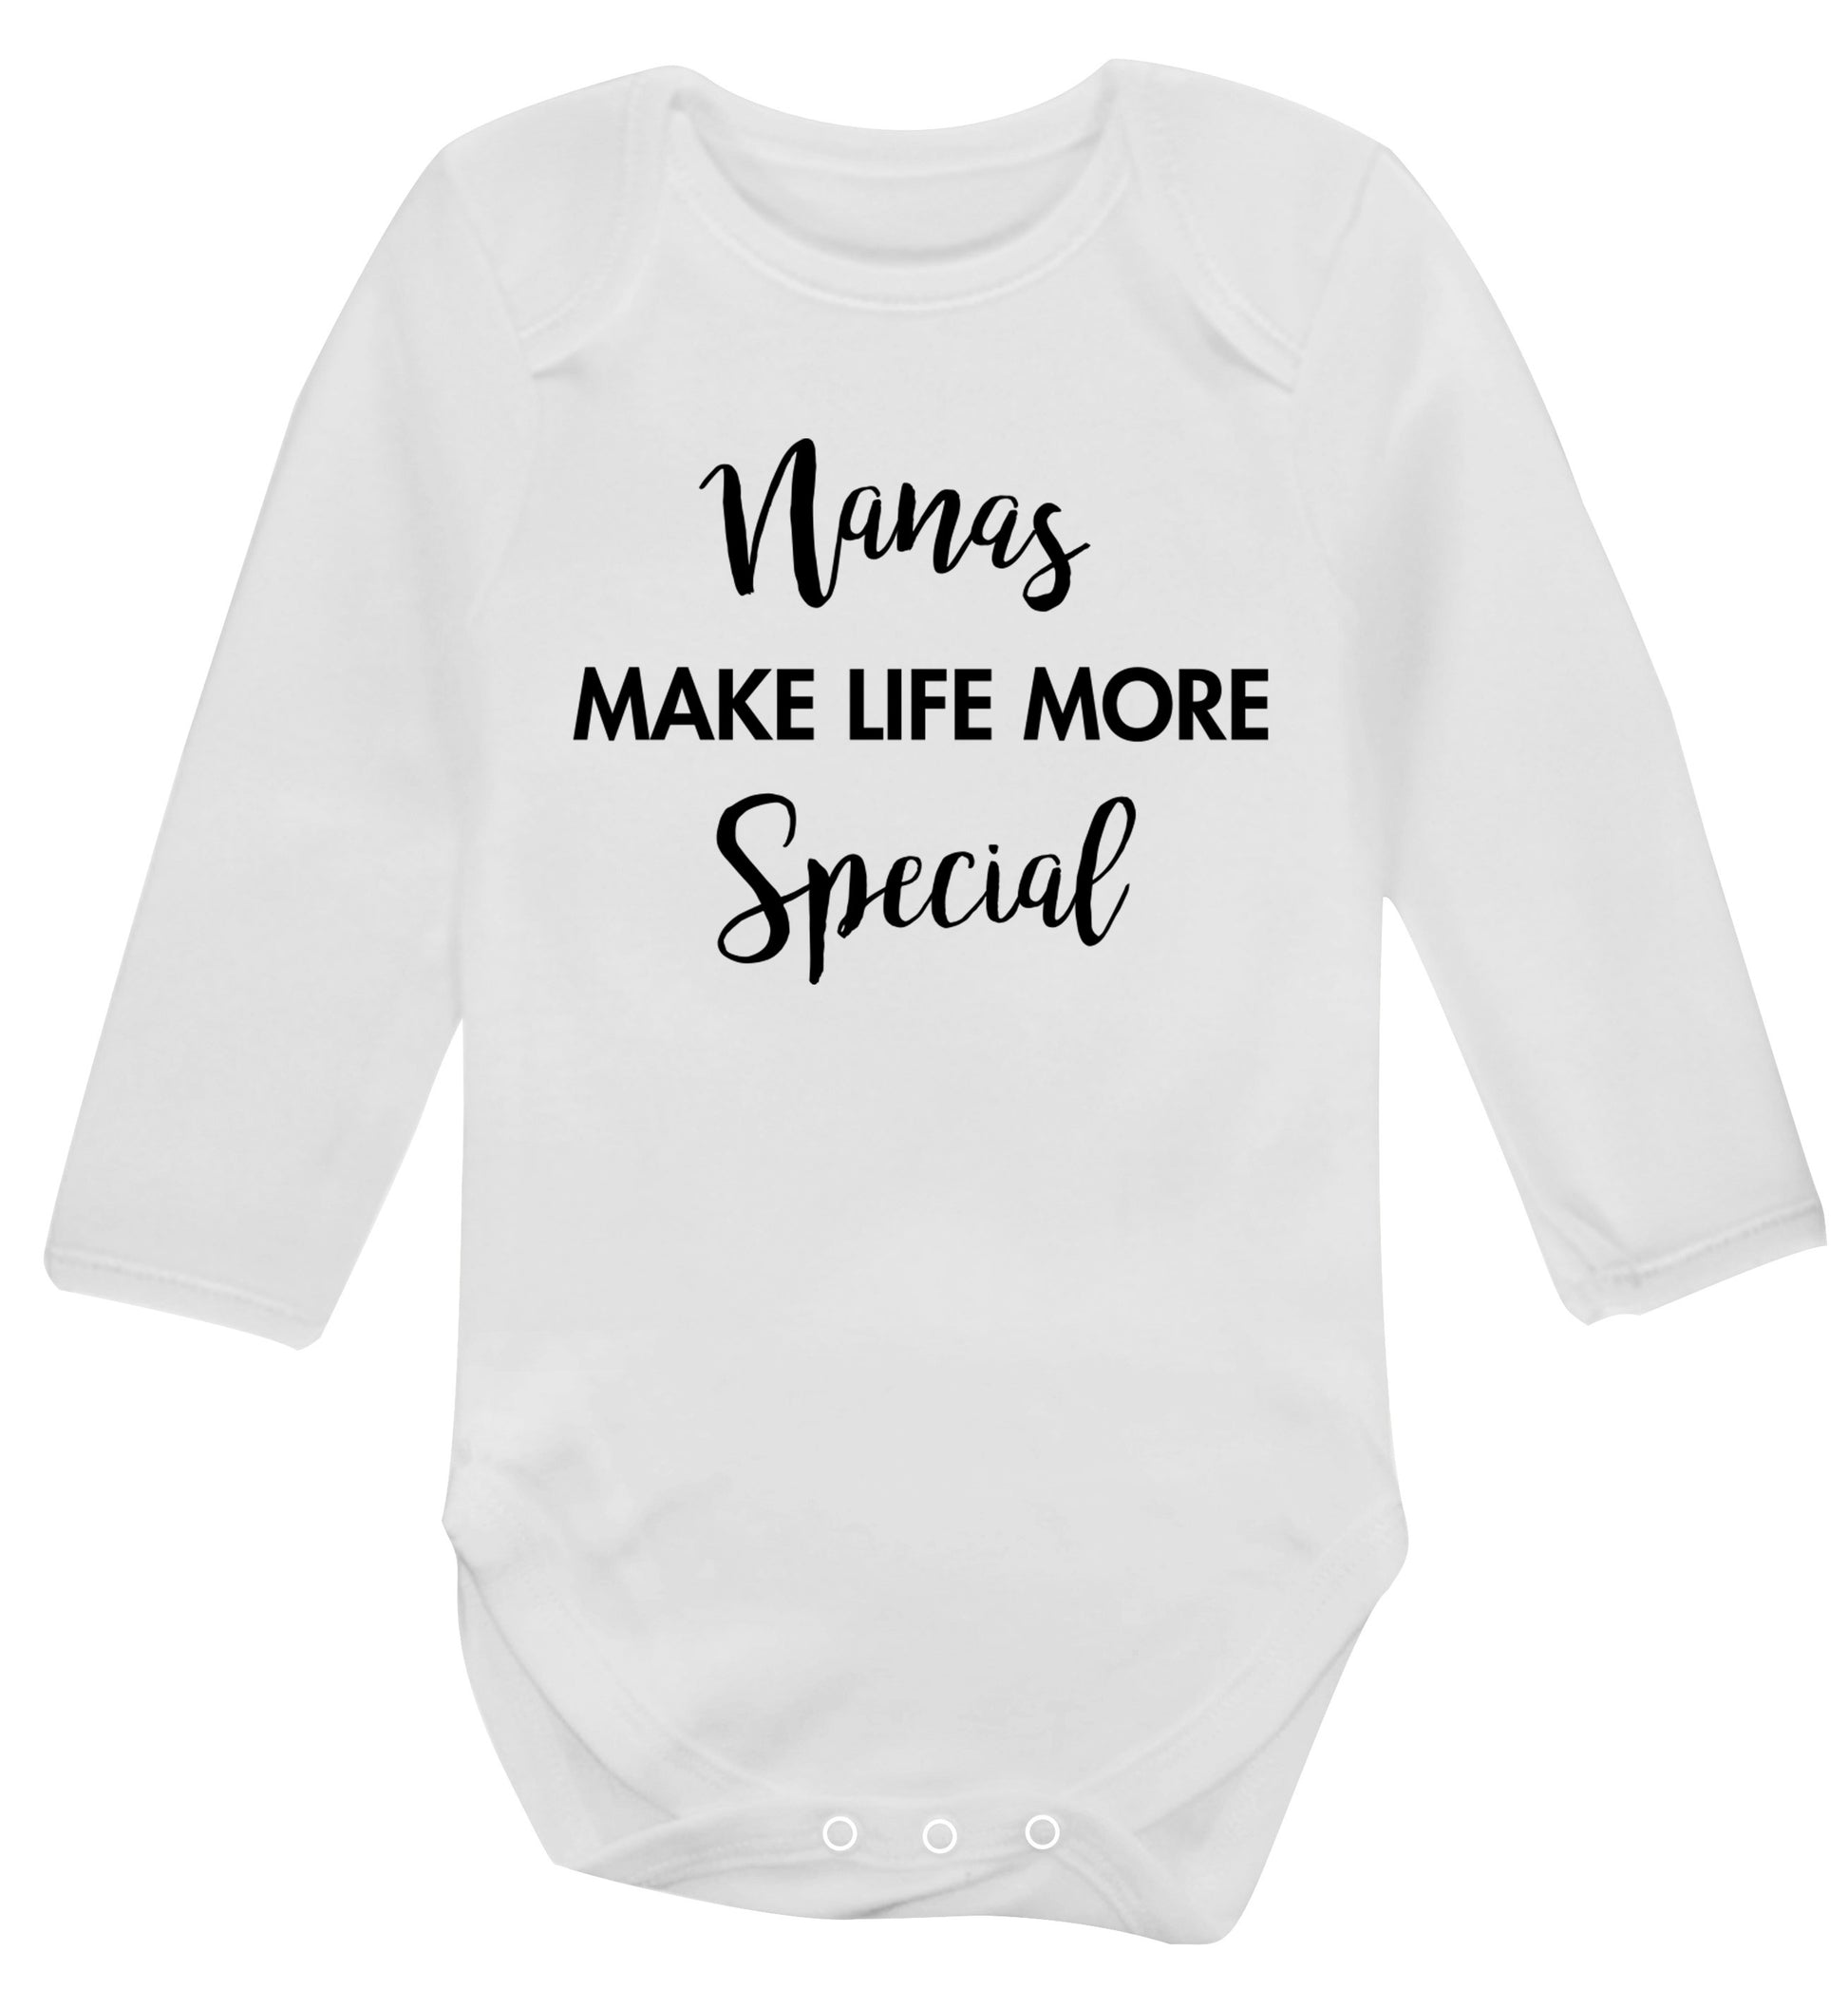 Nanas make life more special Baby Vest long sleeved white 6-12 months